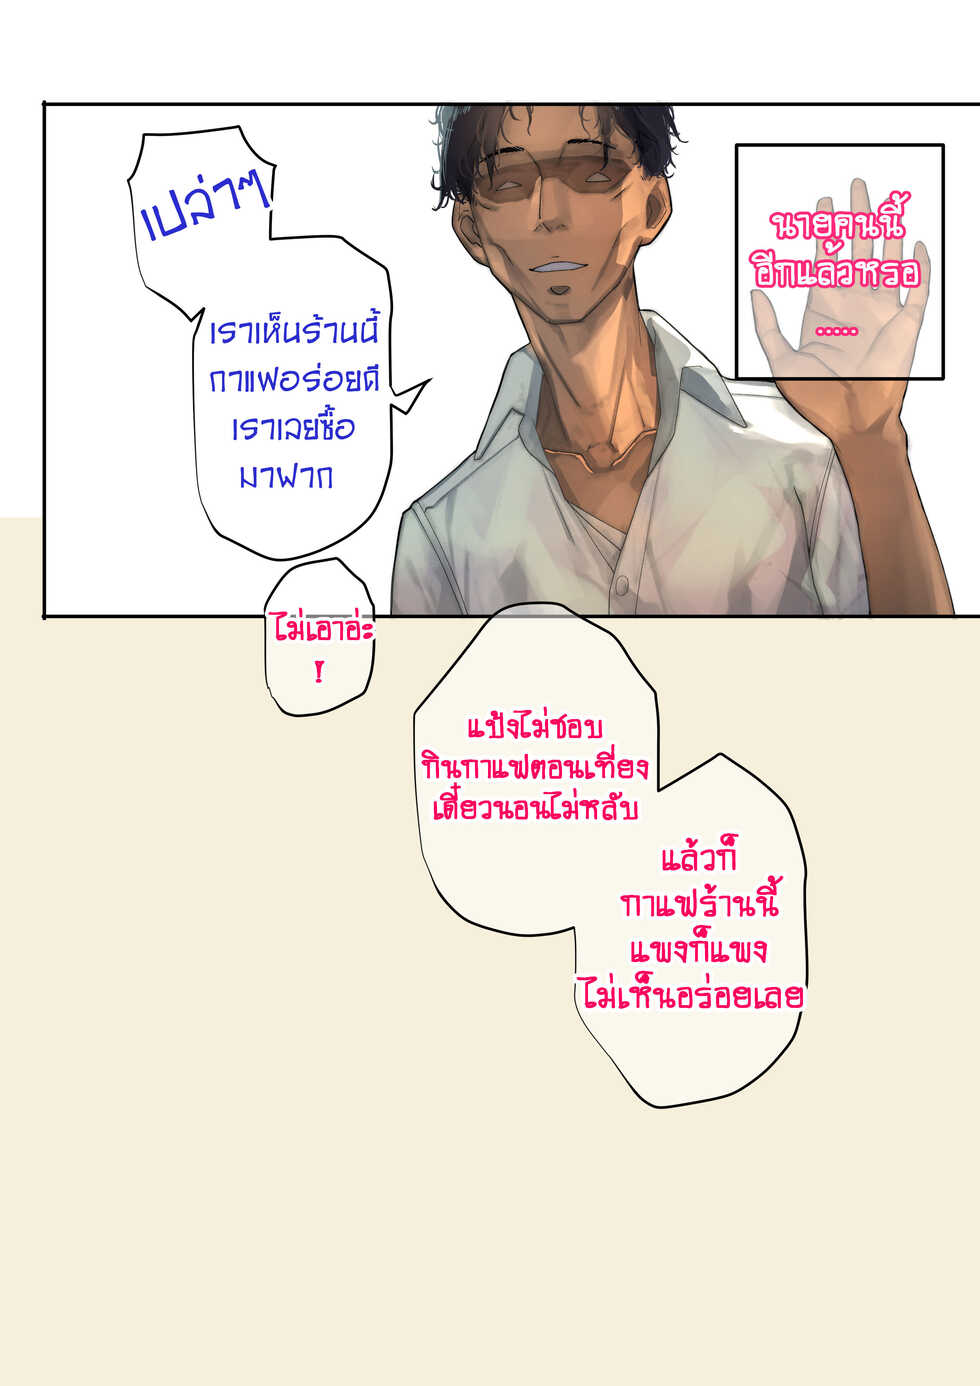 [9LiKiN (Dyed flowers)] - แป้ง(PANG) - - Page 14